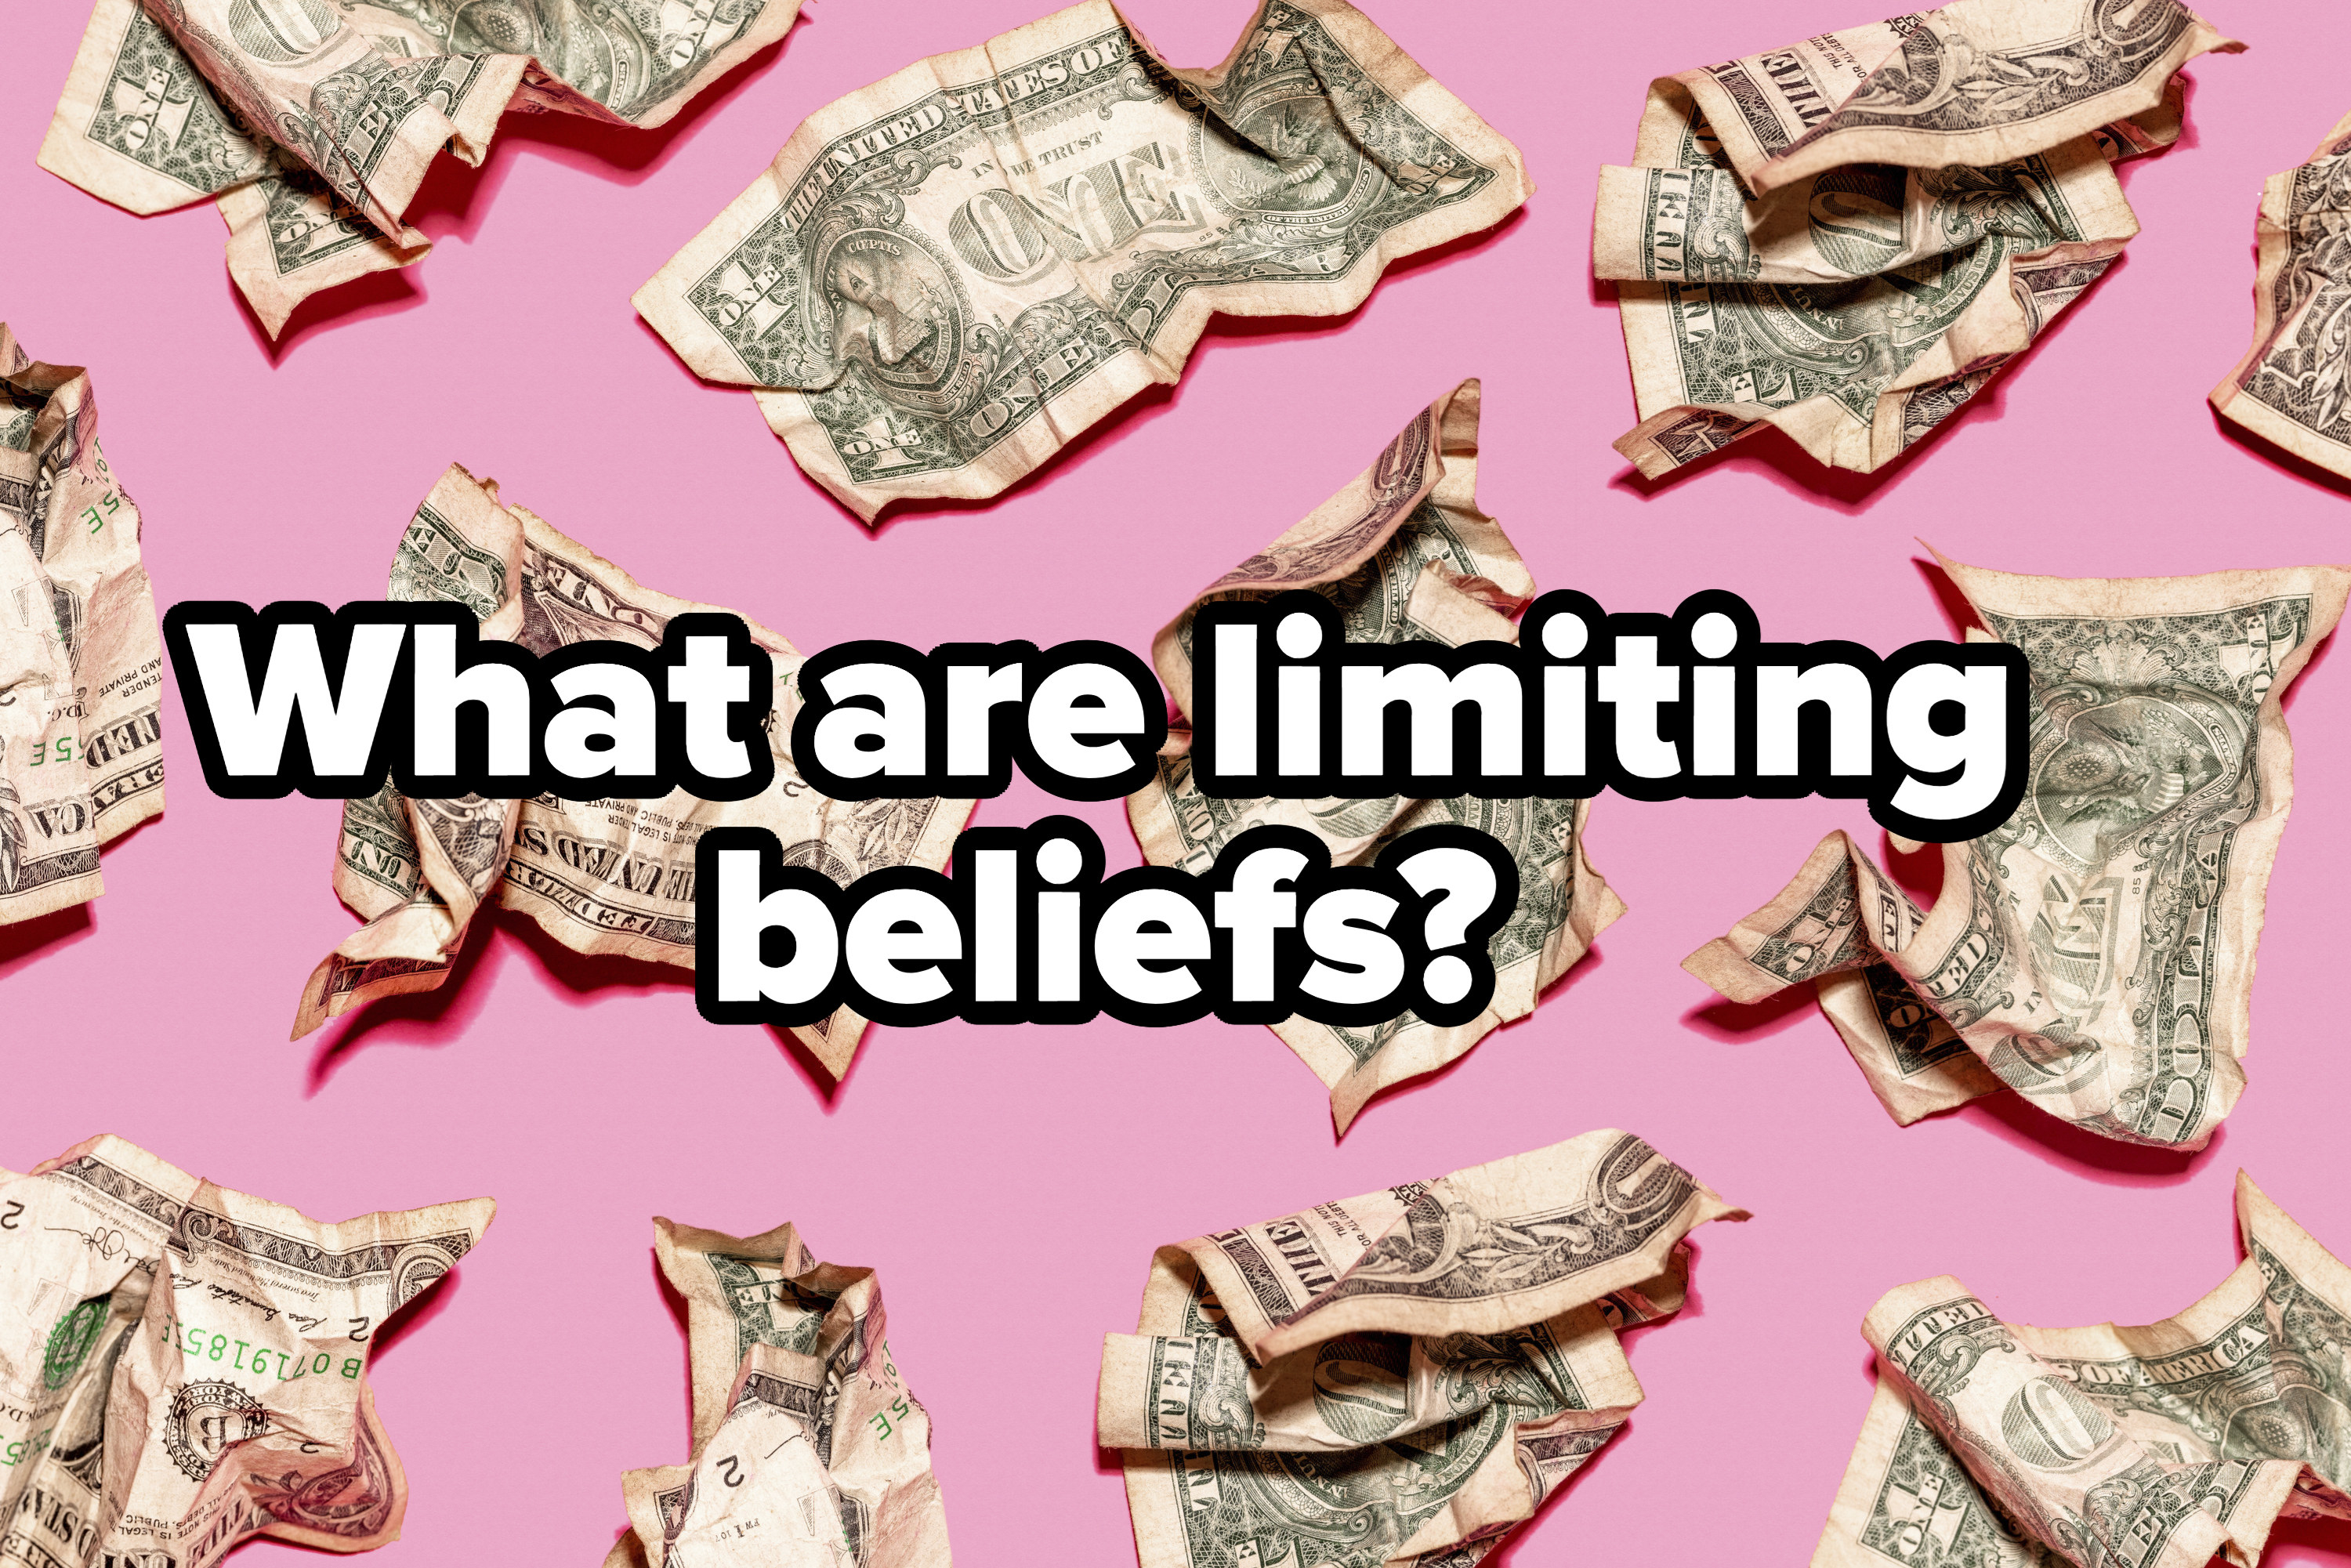 What are limiting beliefs